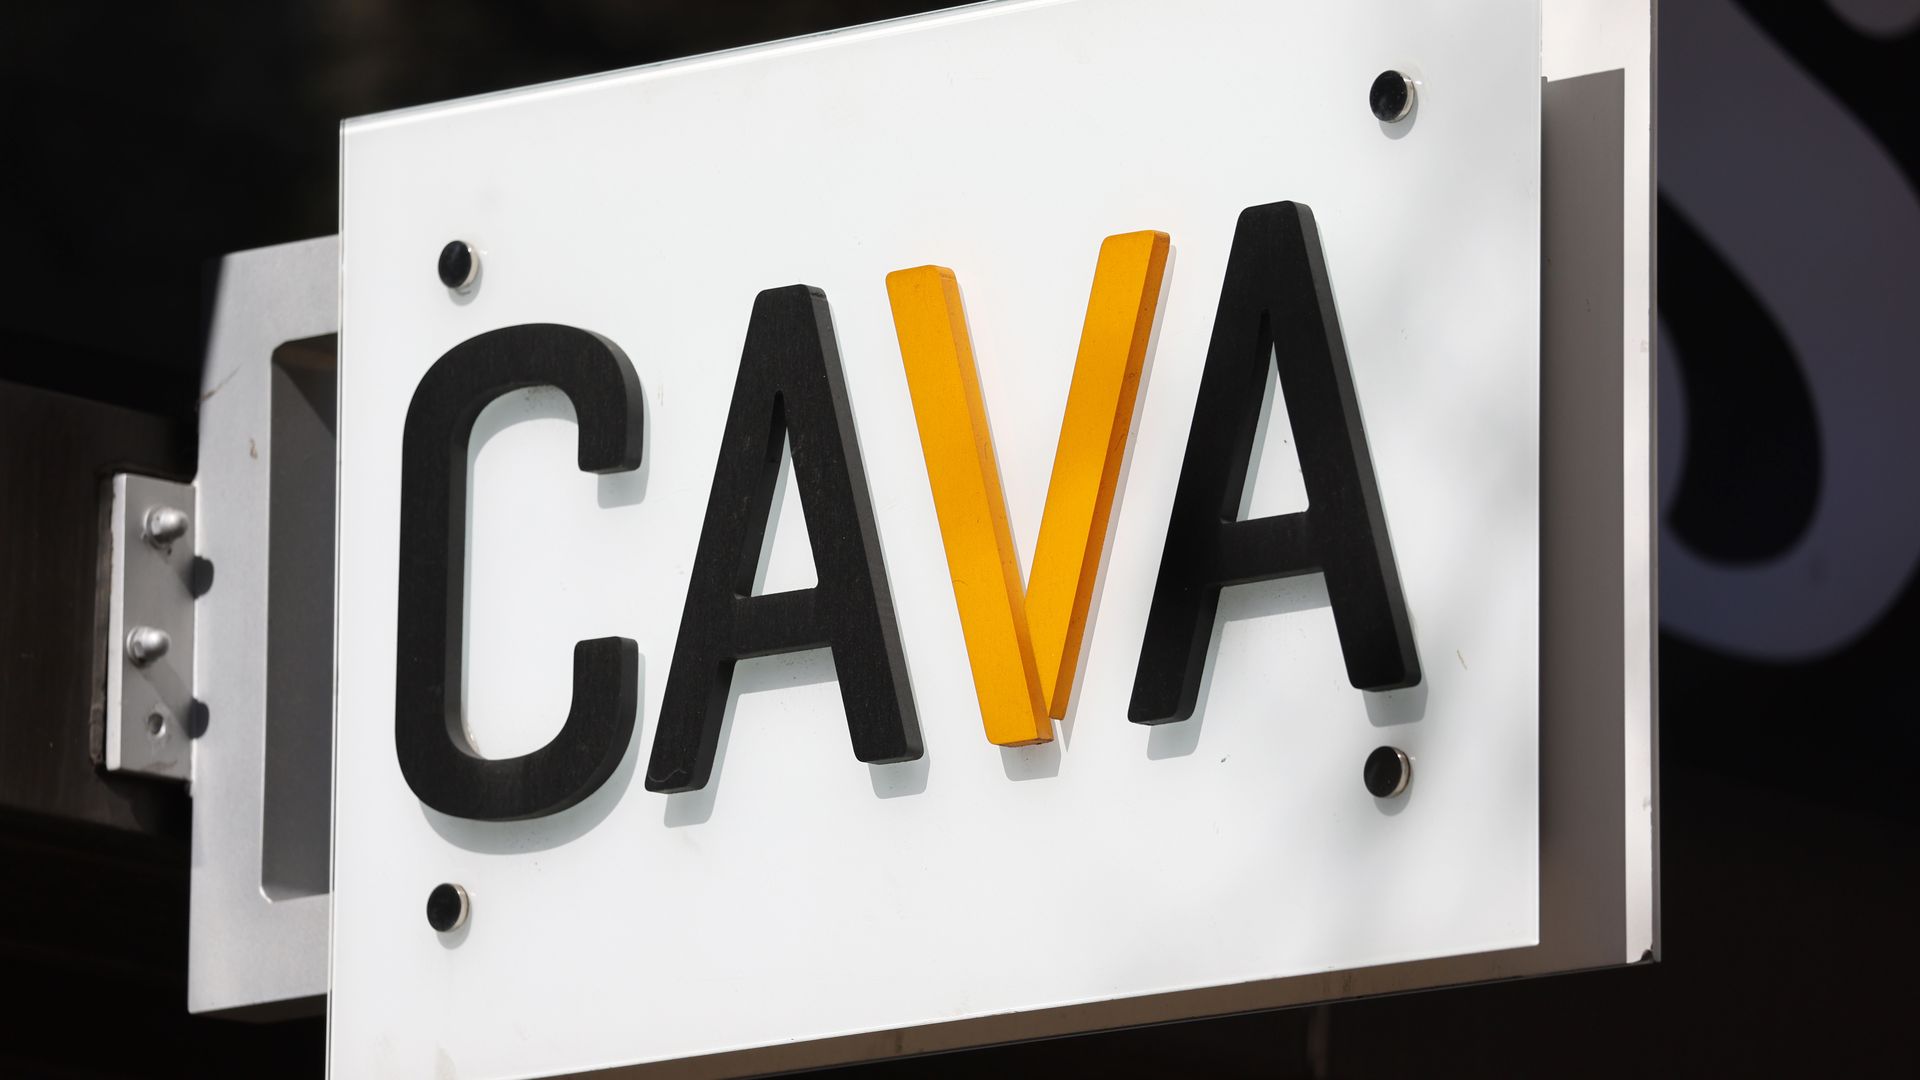 A Cava restaurant sign hangs on one of its locations.